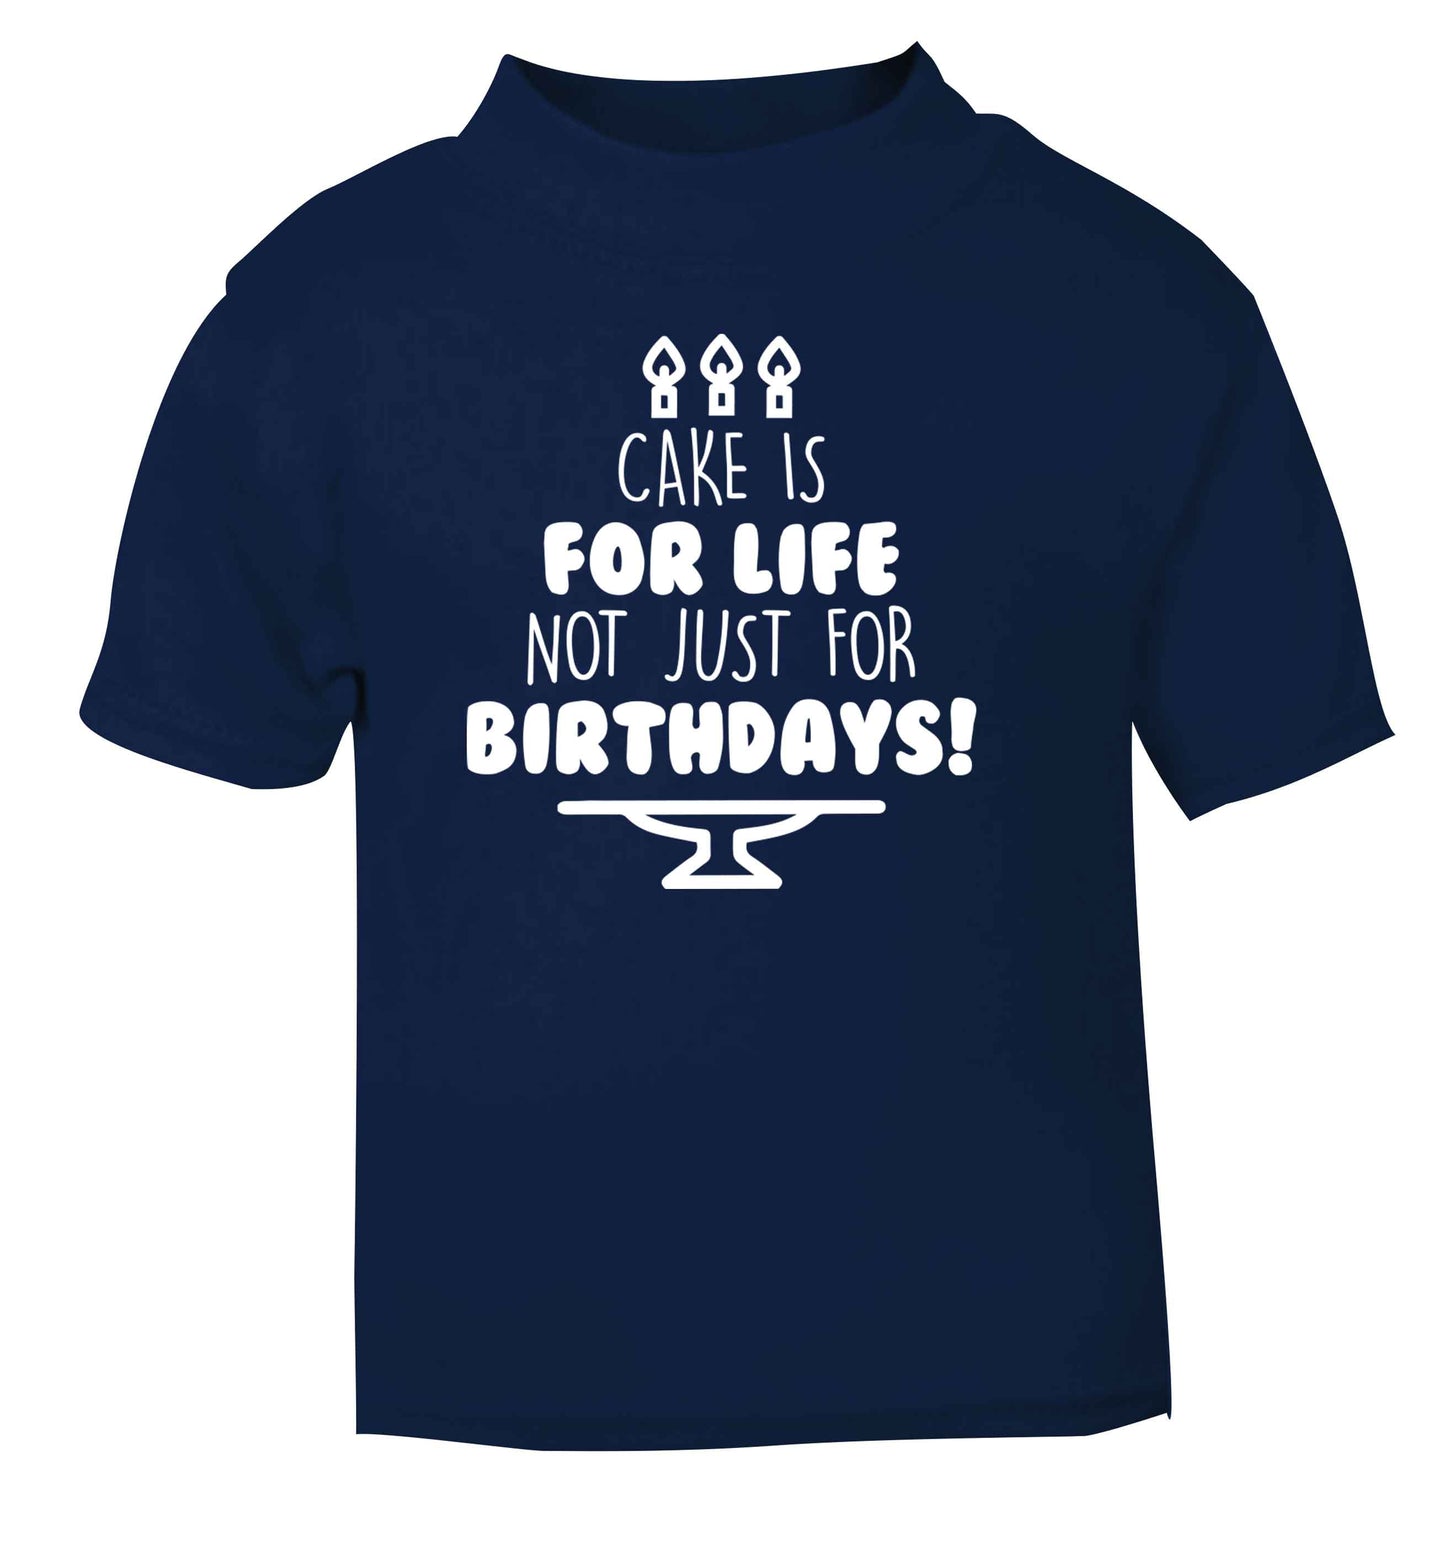 Cake is for life not just for birthdays navy Baby Toddler Tshirt 2 Years